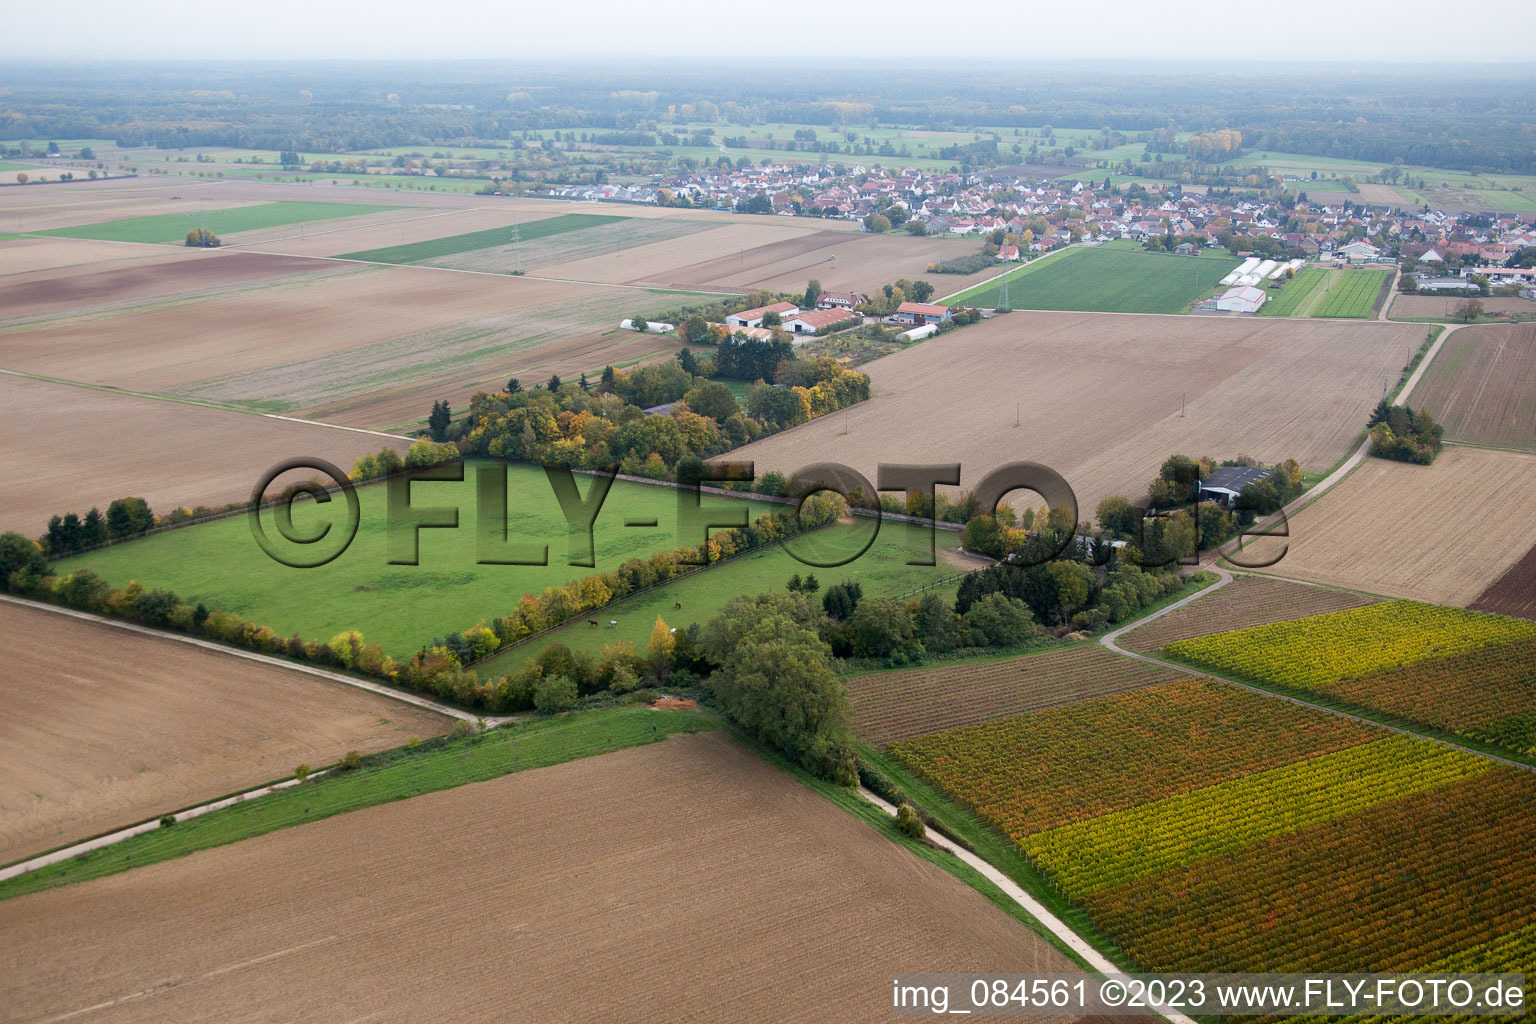 Minfeld in the state Rhineland-Palatinate, Germany from the drone perspective